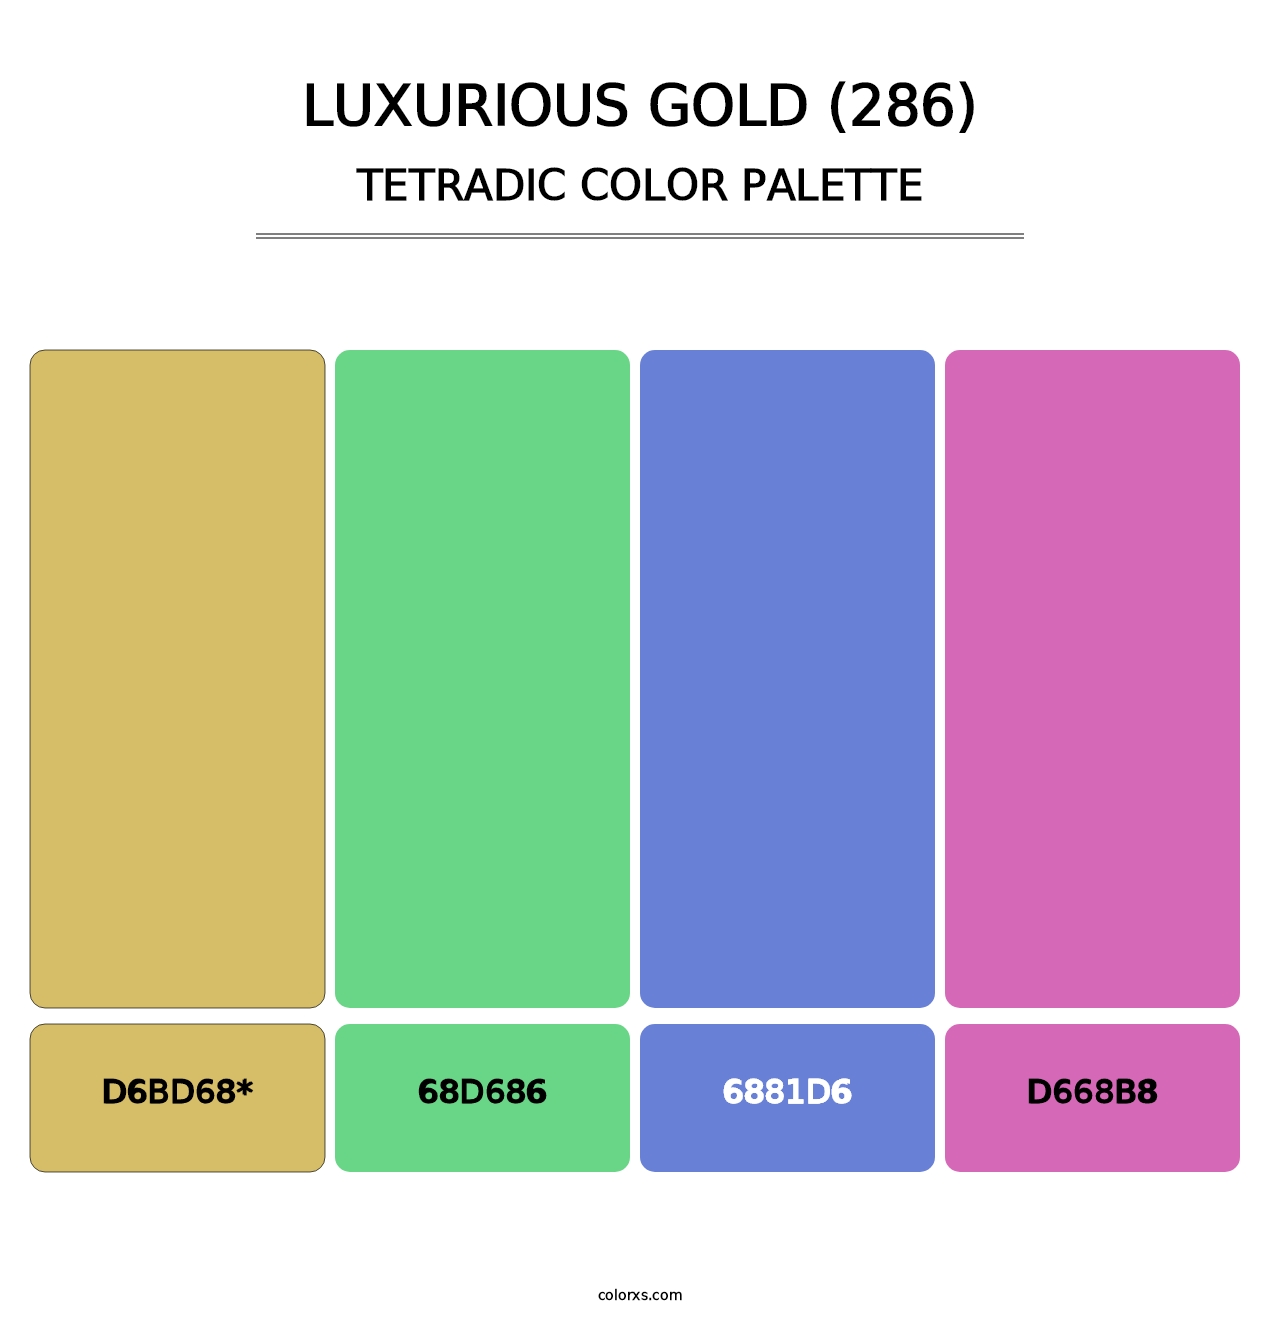 Luxurious Gold (286) - Tetradic Color Palette